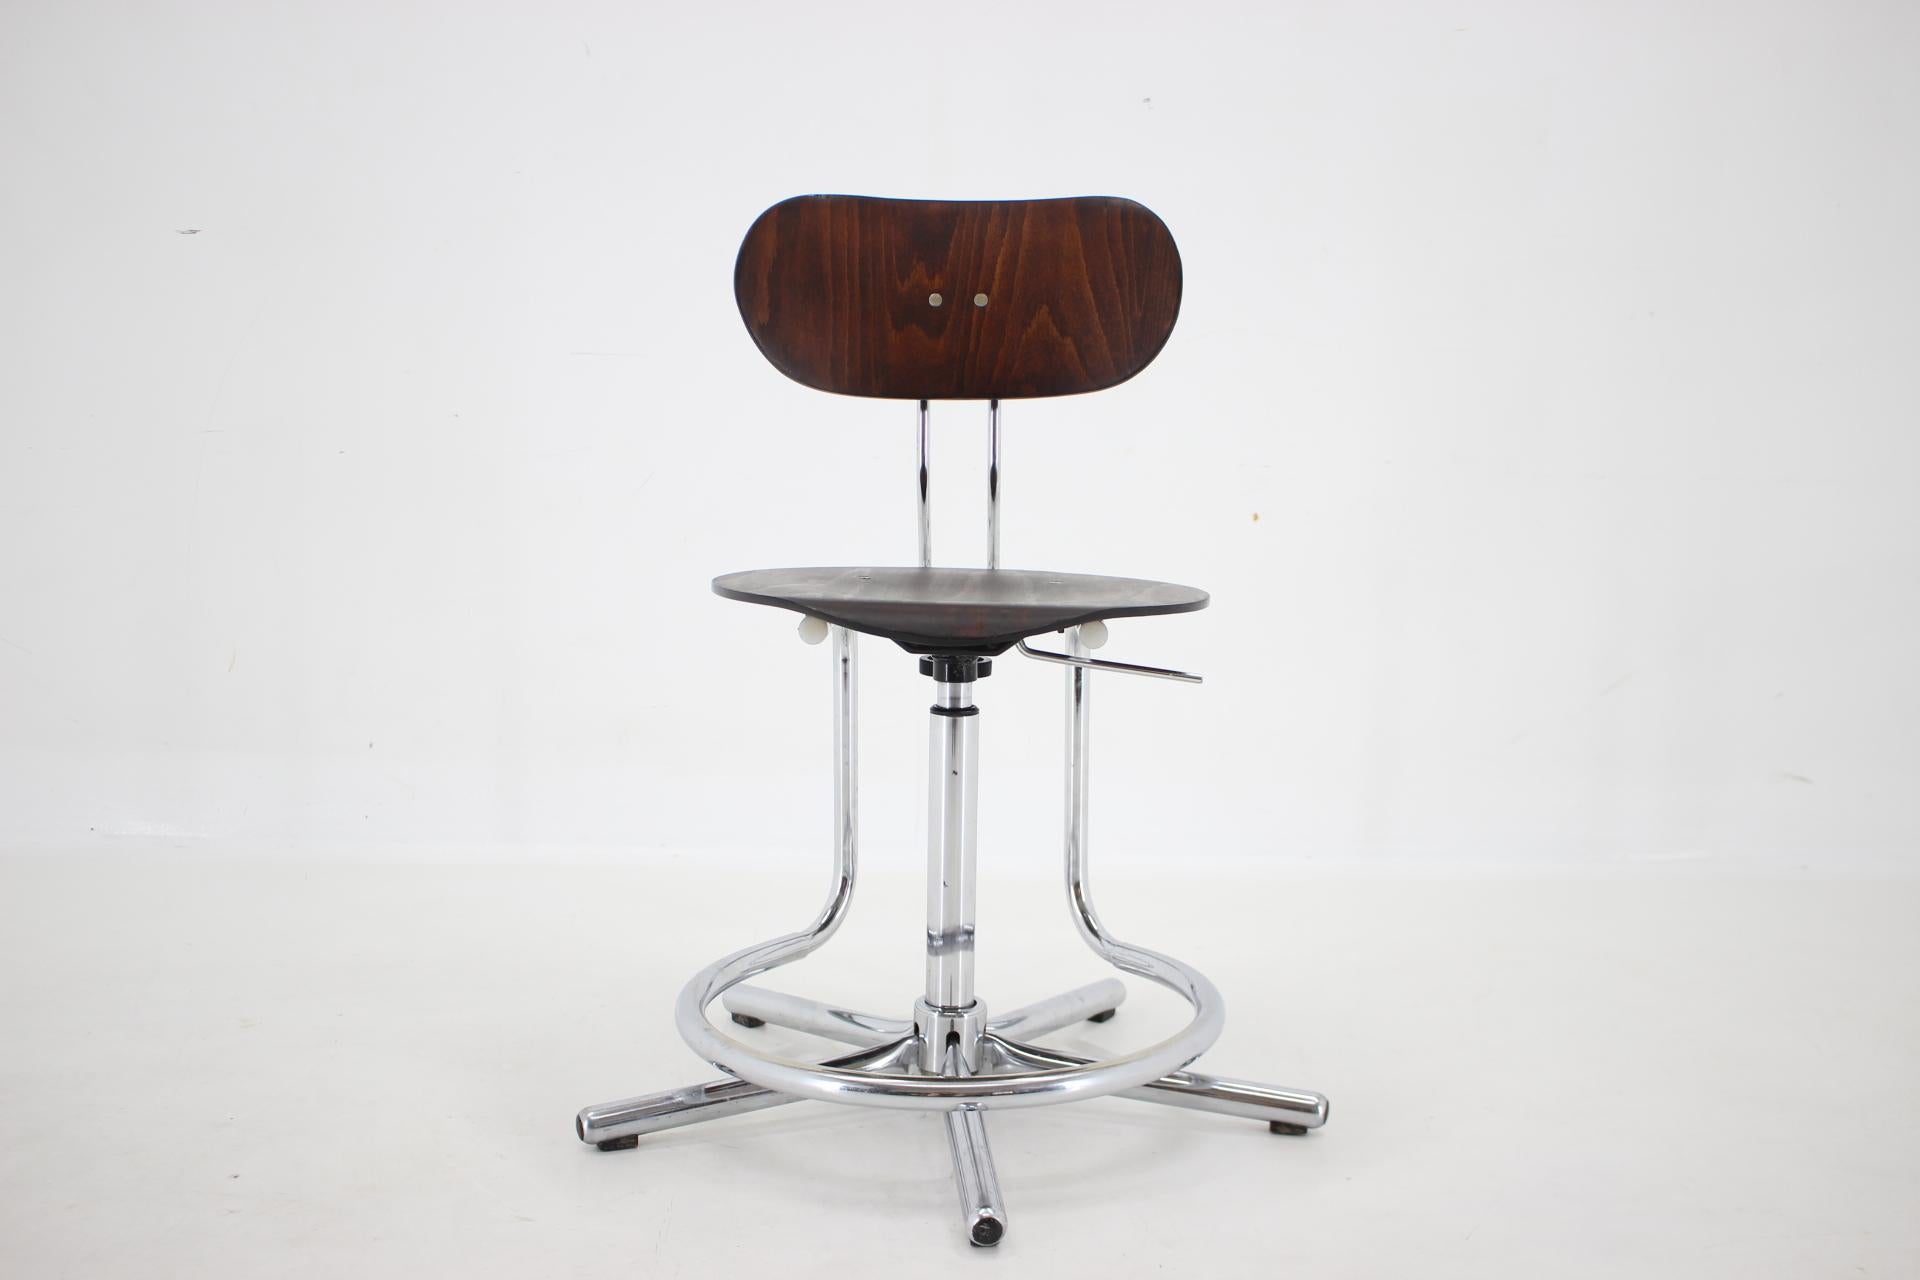 - Carefully refurbished
- works properly 
- Seat Height : 44 - 63 cm